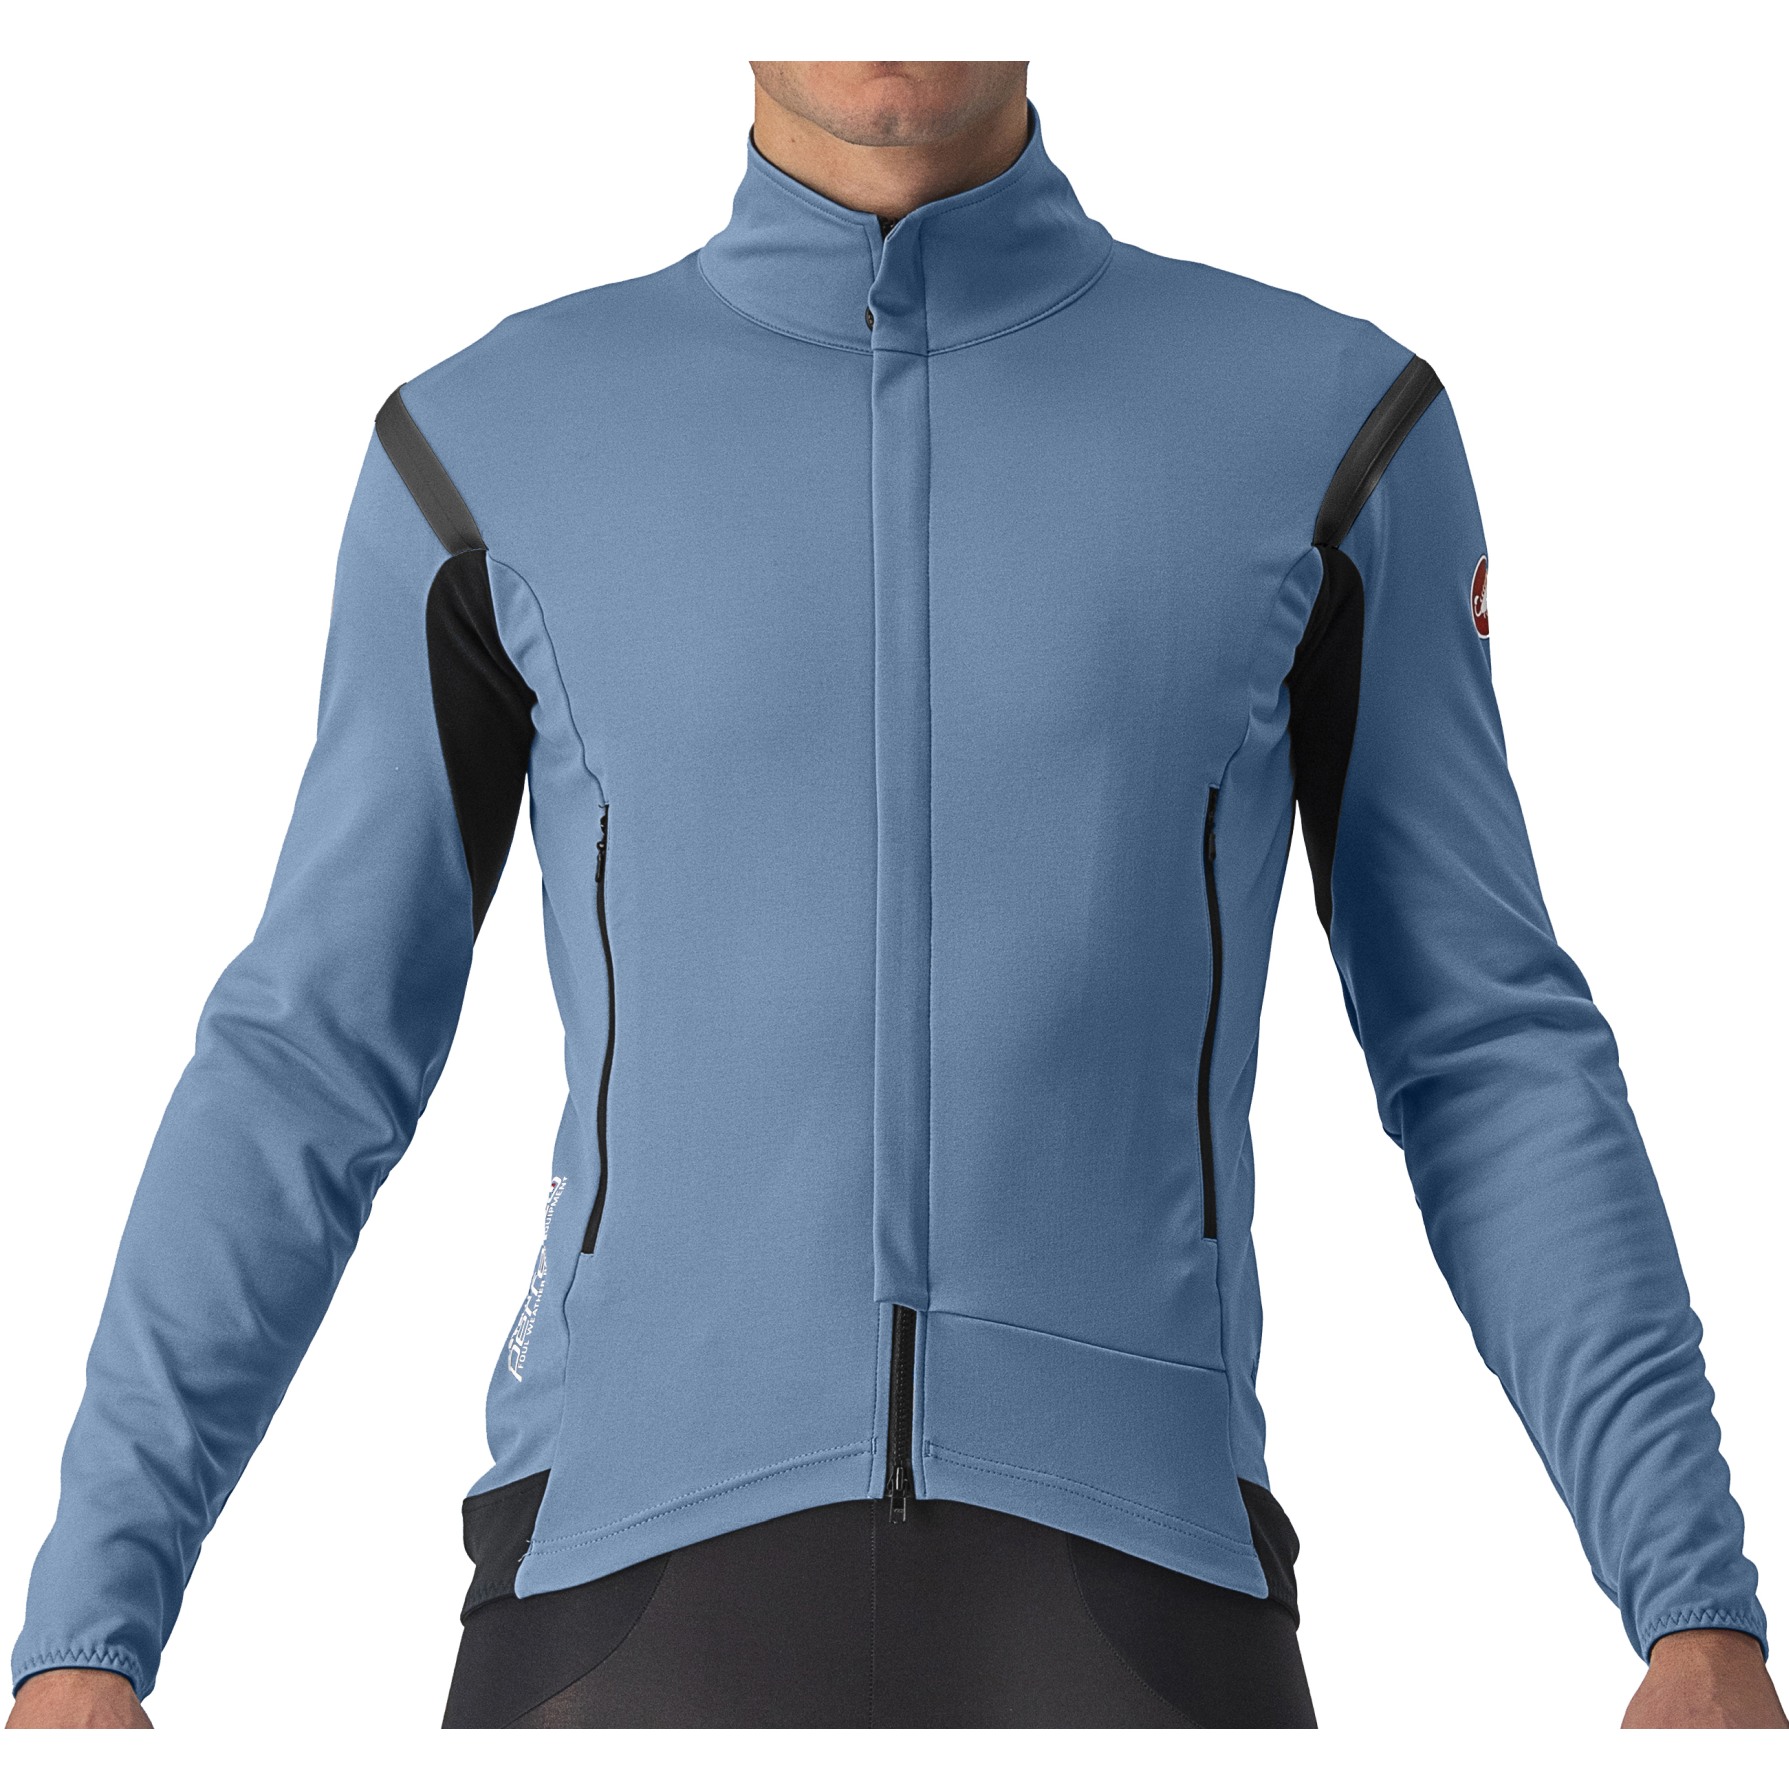 Picture of Castelli Perfetto RoS 2 Jacket - steel blue/savile blue 473